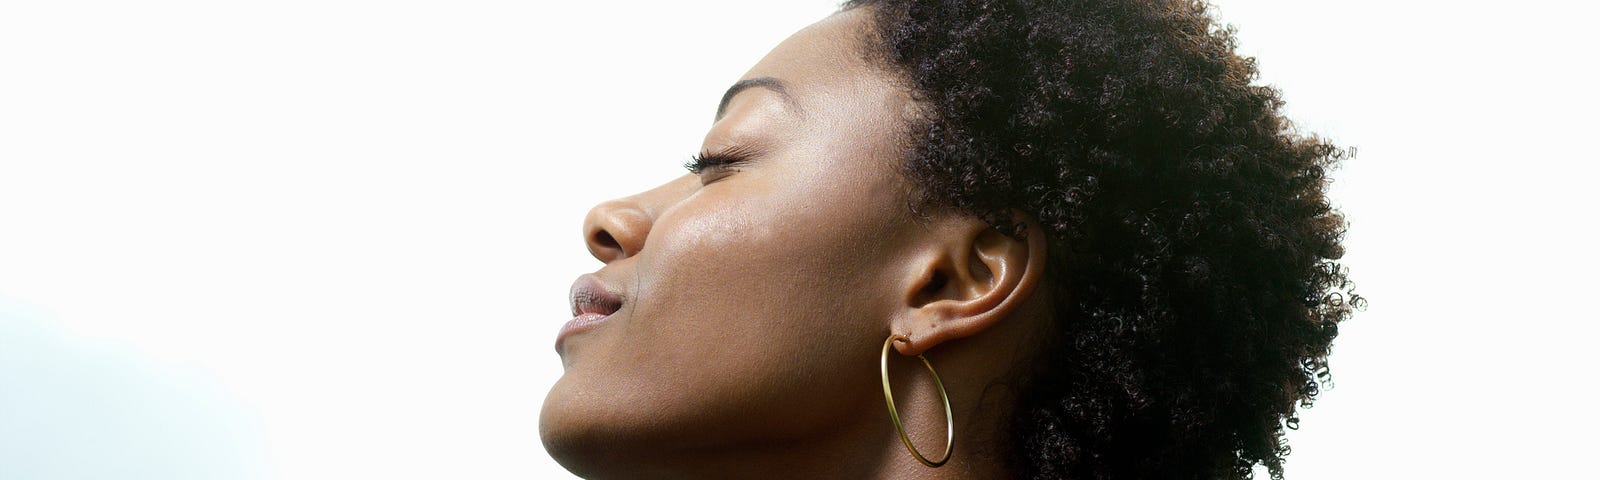 A photo of a black woman with her eyes closed, head tilted towards the sky, looking peaceful and serene.